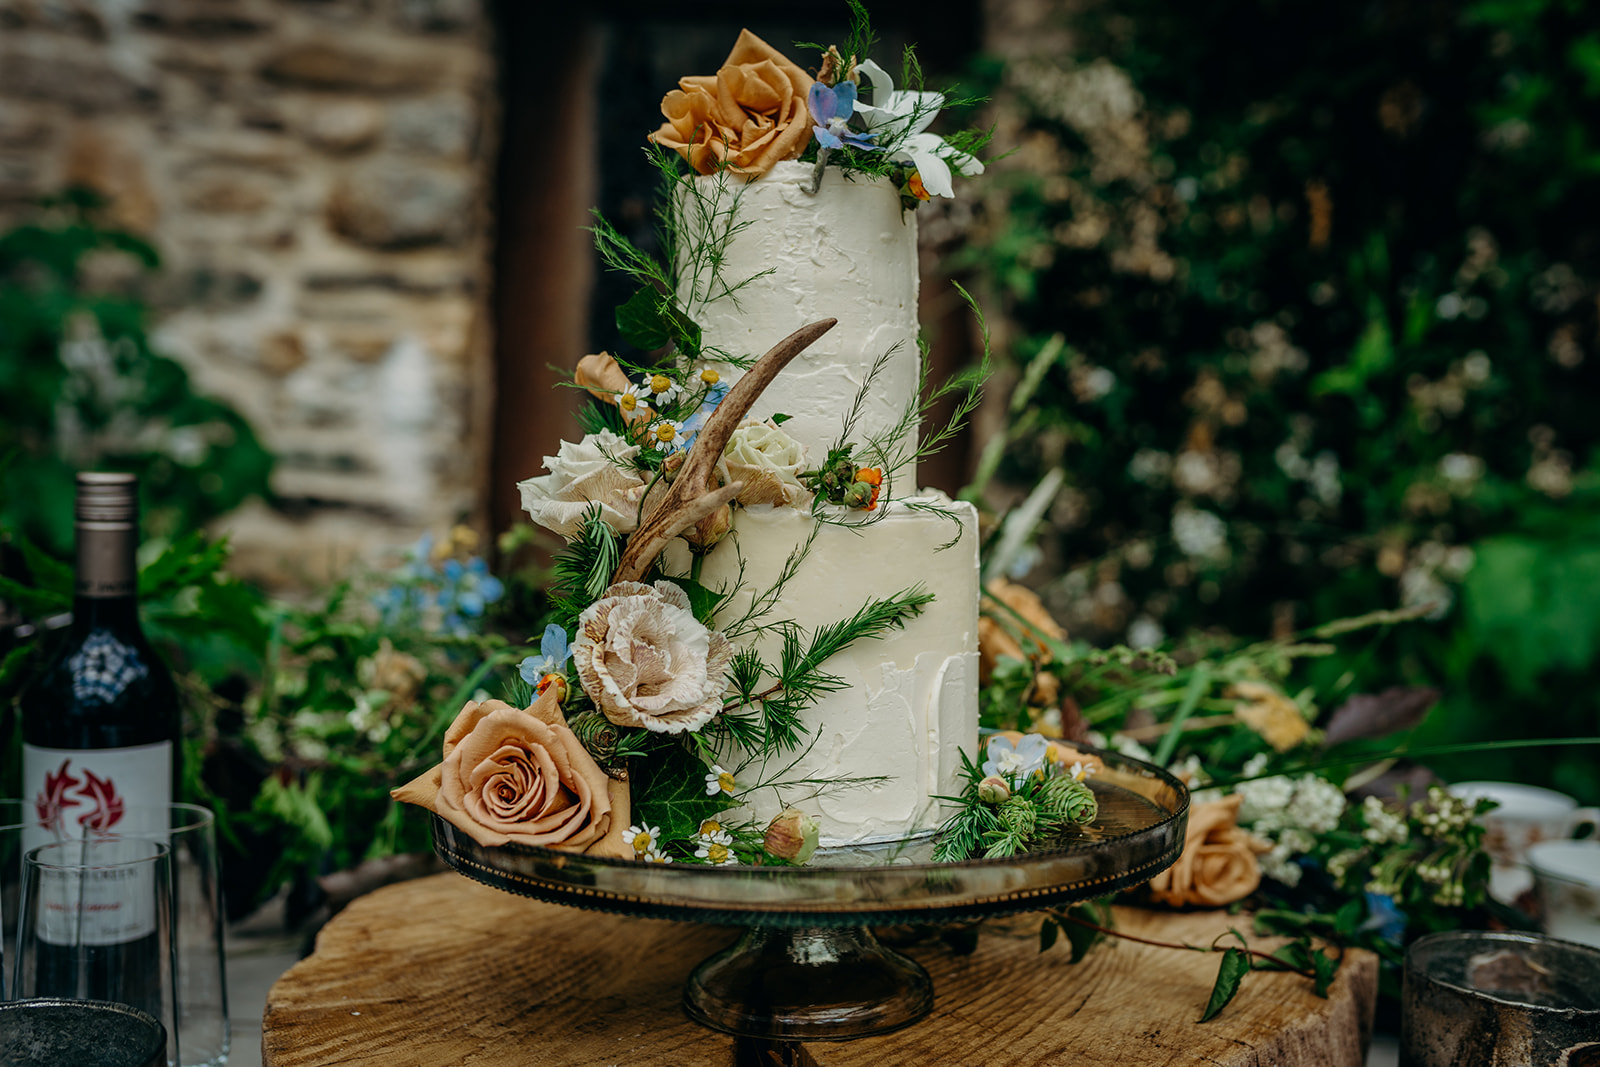 elopement wedding cake decorated with toffee roses, pale blue flowers on a cake stand on a log slice